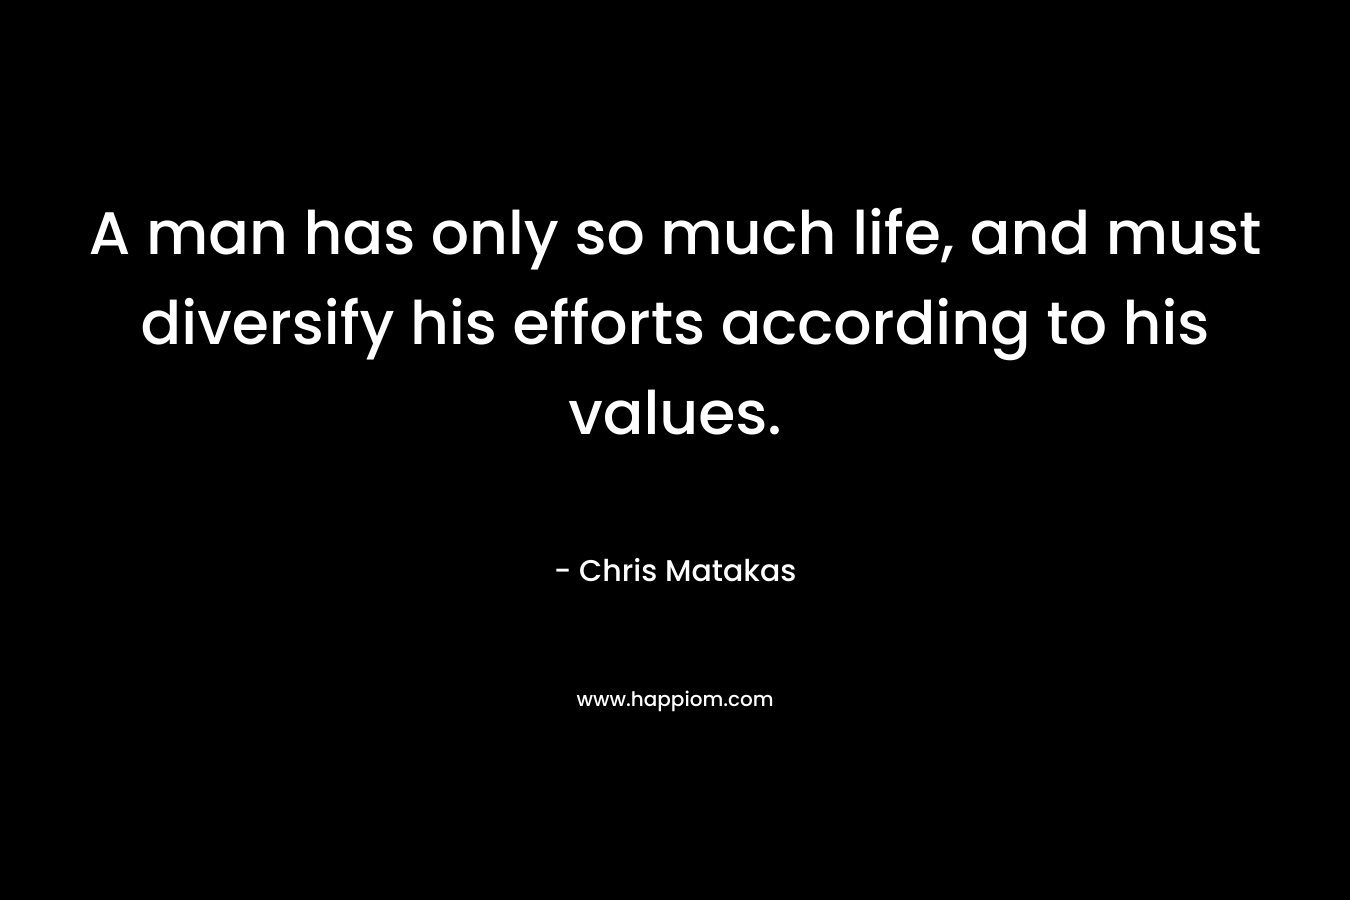 A man has only so much life, and must diversify his efforts according to his values. – Chris Matakas